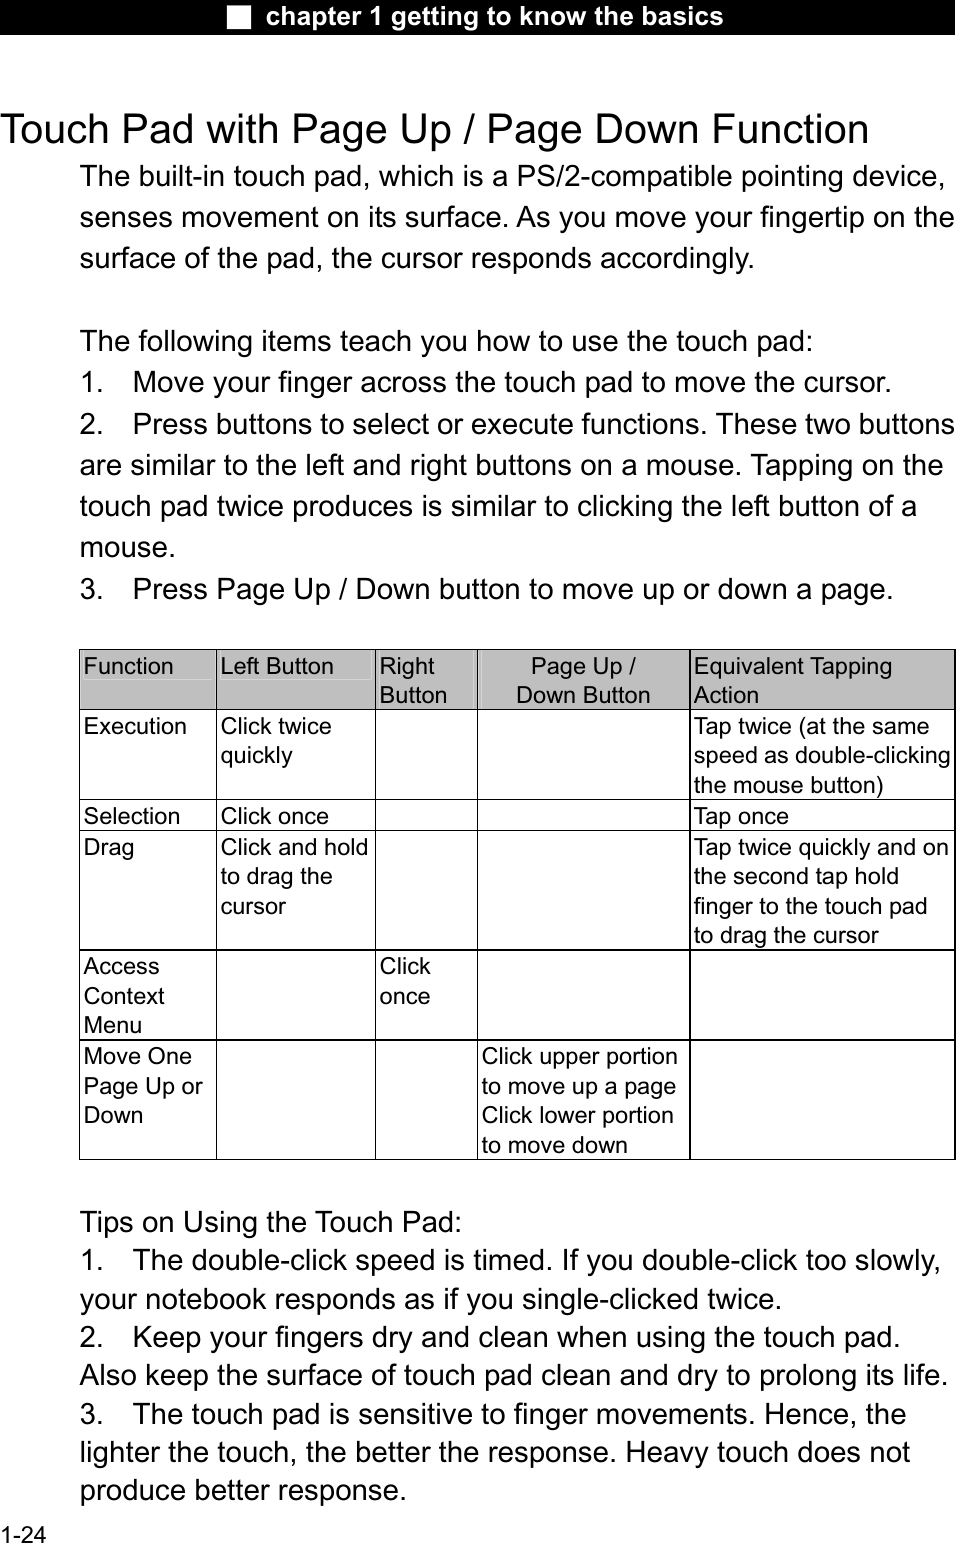 Ϯ chapter 1 getting to know the basicsTouch Pad with Page Up / Page Down Function The built-in touch pad, which is a PS/2-compatible pointing device, senses movement on its surface. As you move your fingertip on thesurface of the pad, the cursor responds accordingly.The following items teach you how to use the touch pad:1. Move your finger across the touch pad to move the cursor.2. Press buttons to select or execute functions. These two buttonsare similar to the left and right buttons on a mouse. Tapping on thetouch pad twice produces is similar to clicking the left button of a mouse.3. Press Page Up / Down button to move up or down a page.Function Left Button  RightButtonPage Up / Down Button Equivalent TappingActionExecution Click twicequicklyTap twice (at the samespeed as double-clickingthe mouse button)Selection Click once  Tap once Drag Click and hold to drag thecursorTap twice quickly and on the second tap holdfinger to the touch padto drag the cursorAccessContextMenuClickonceMove One Page Up or DownClick upper portion to move up a pageClick lower portionto move downTips on Using the Touch Pad:1. The double-click speed is timed. If you double-click too slowly,your notebook responds as if you single-clicked twice.2. Keep your fingers dry and clean when using the touch pad.Also keep the surface of touch pad clean and dry to prolong its life. 3. The touch pad is sensitive to finger movements. Hence, the lighter the touch, the better the response. Heavy touch does not produce better response.1-24